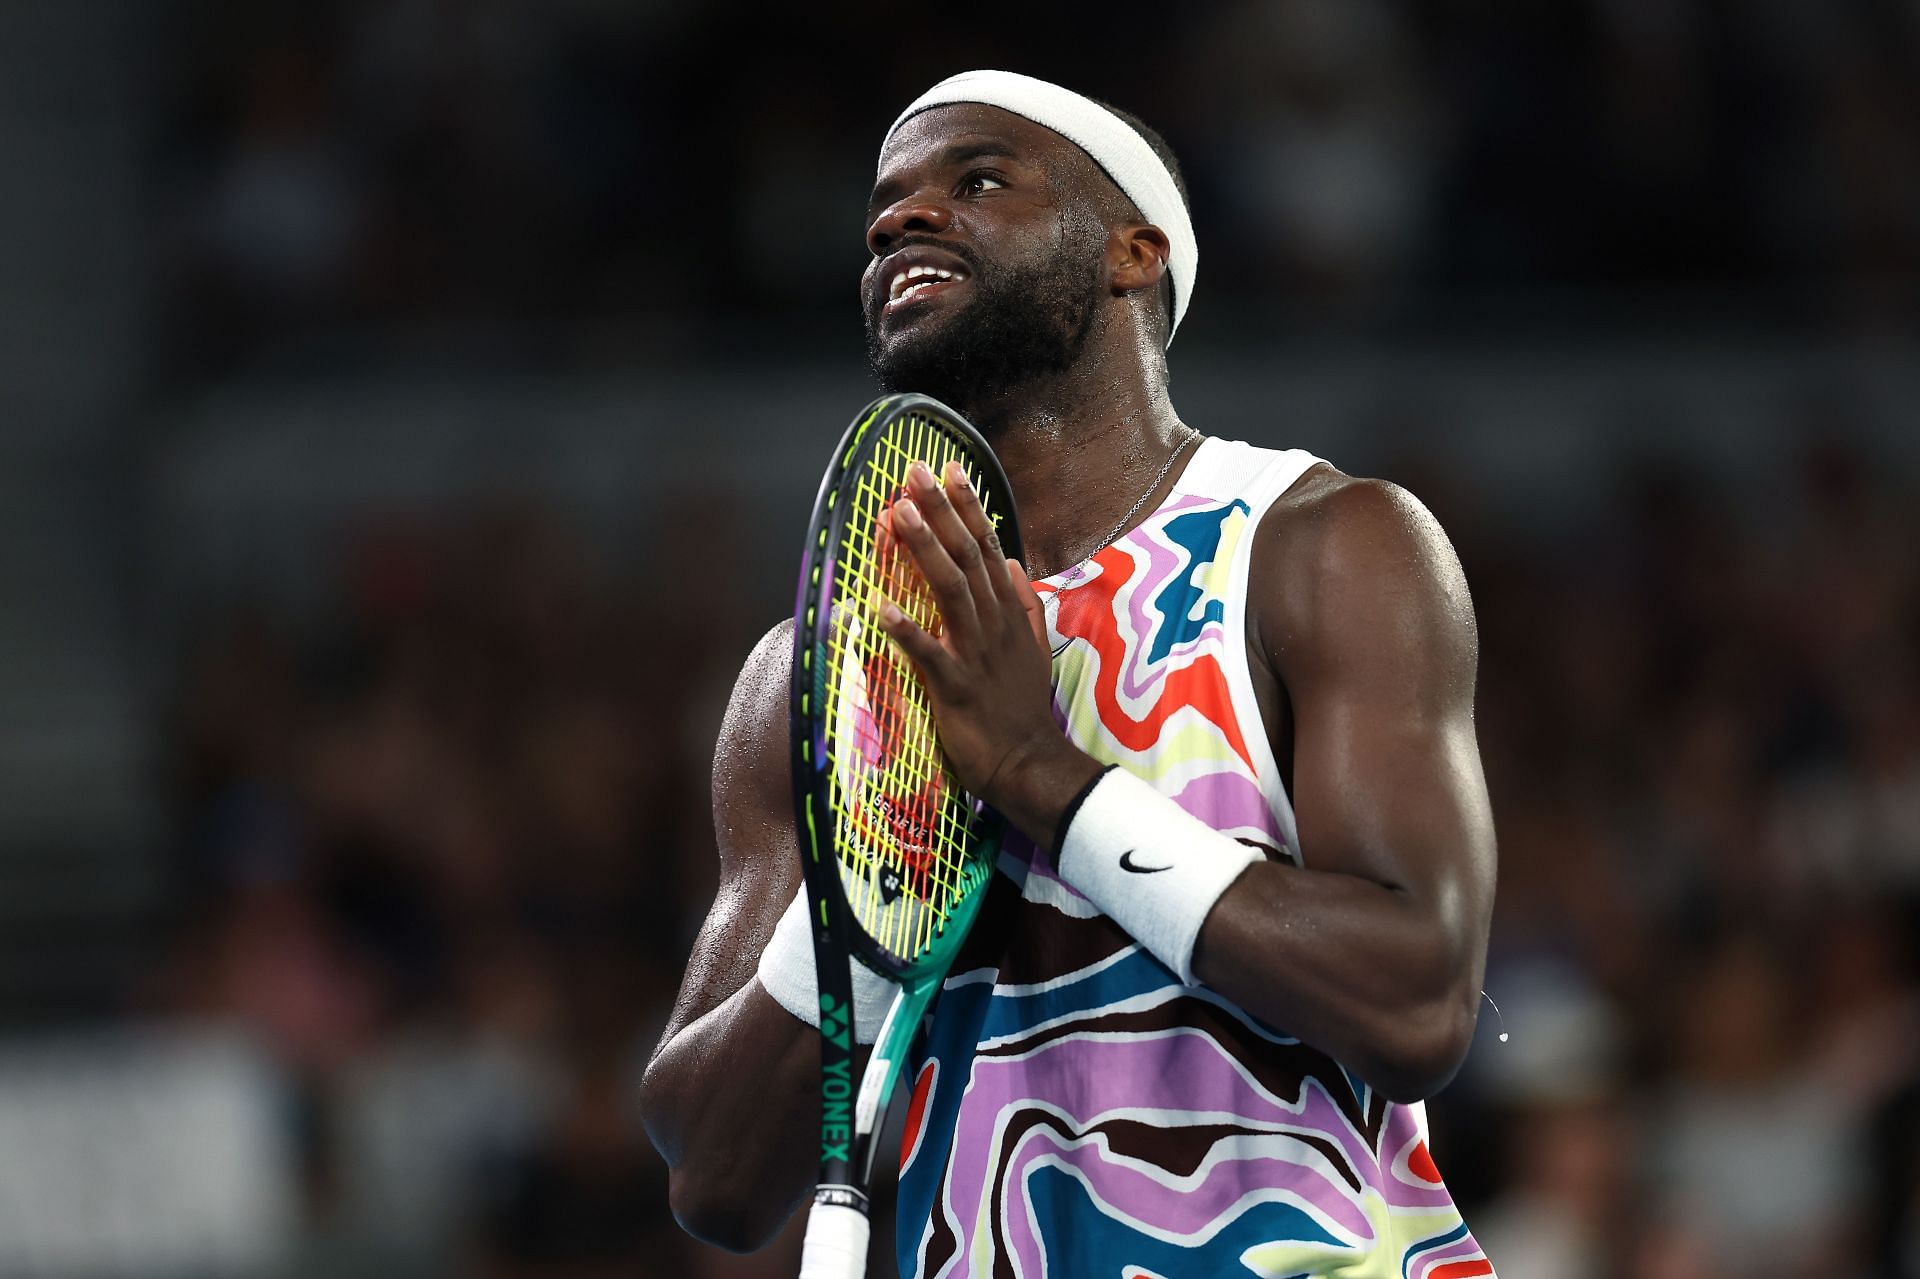 Frances Tiafoe pictured at the 2023 Australian Open - Day 5.